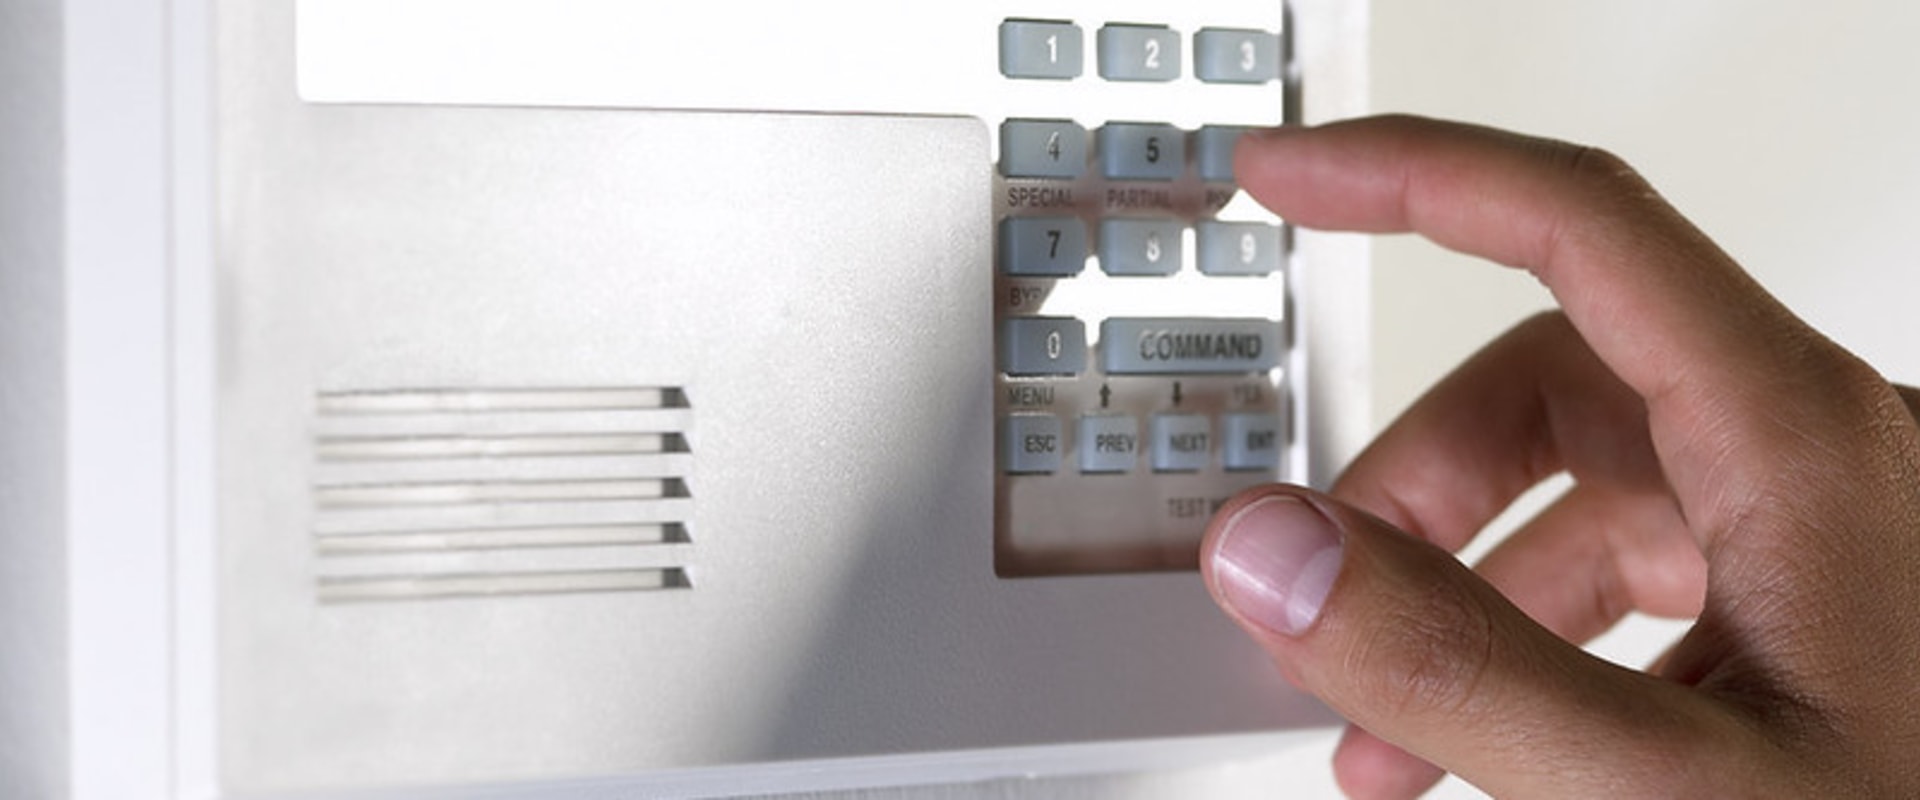 Protecting Your Miami Home: A Guide To Installing A Burglar Alarm And Surveillance System During Remodel